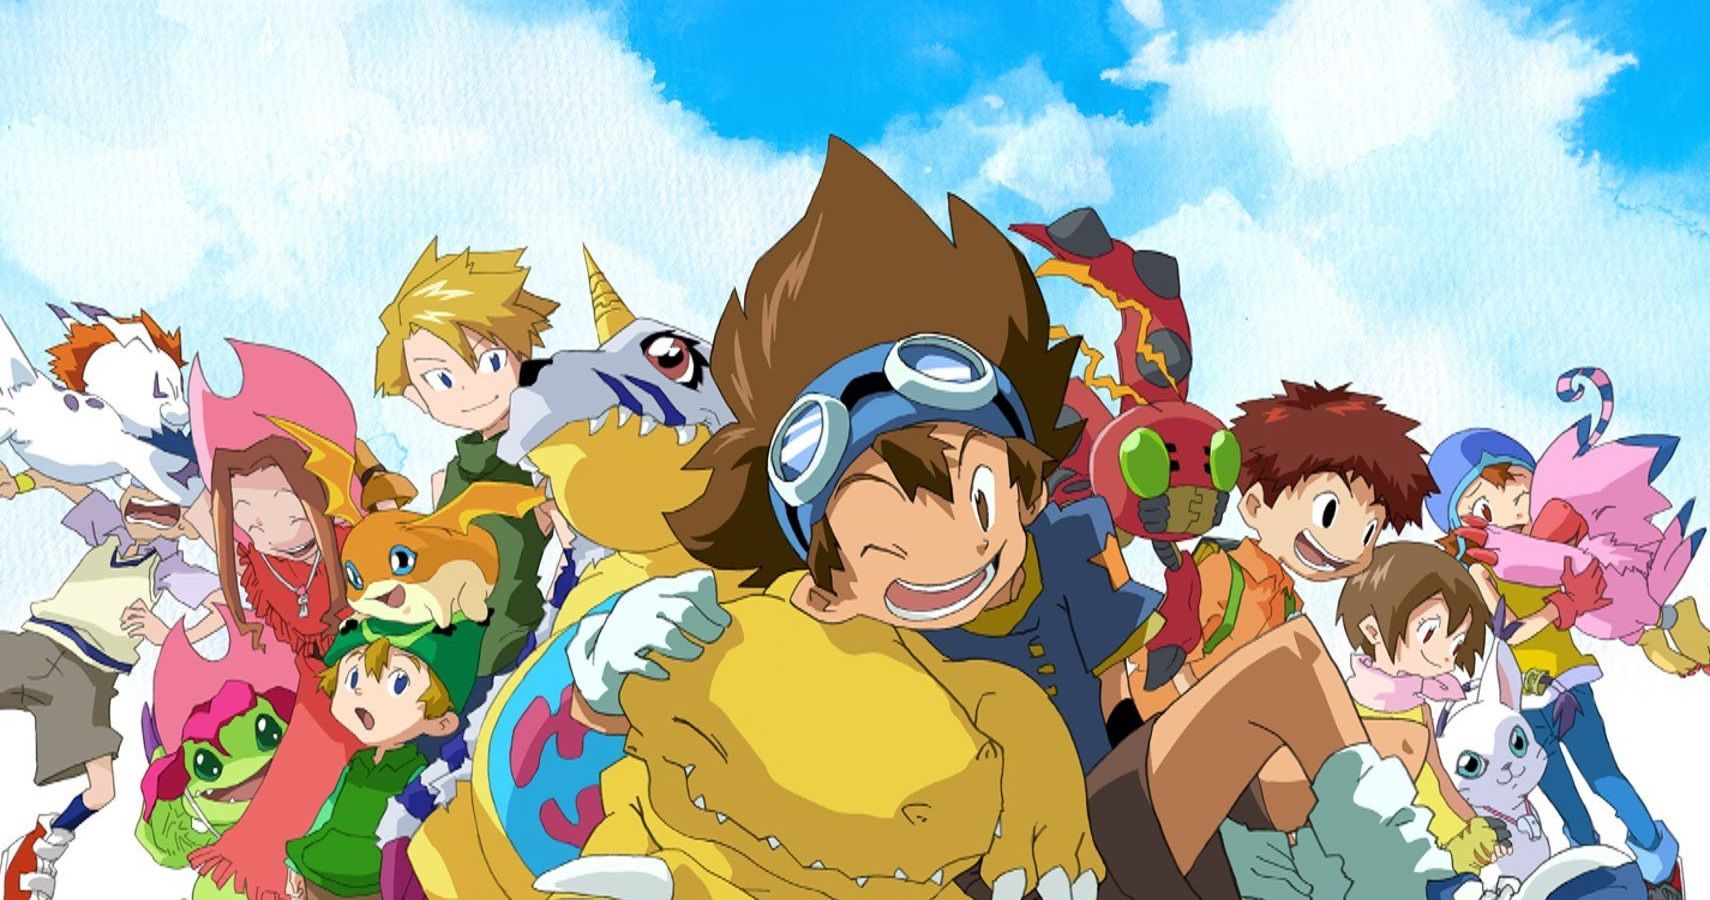 cast of the original Digimon show with their digimon